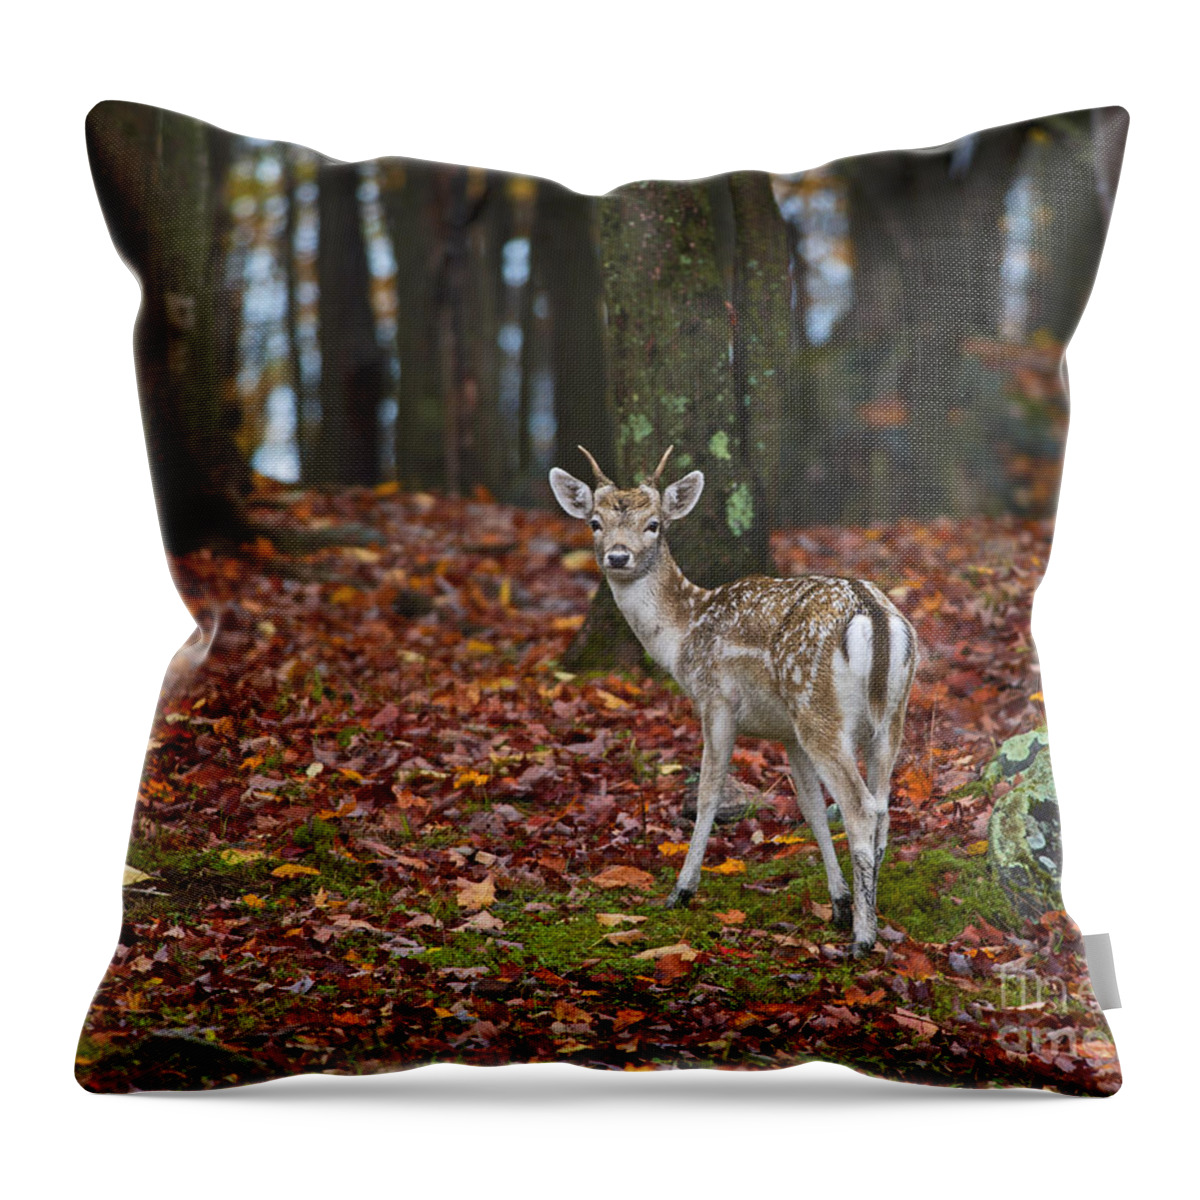 Nina Stavlund Throw Pillow featuring the photograph Fall Fairytale.. by Nina Stavlund